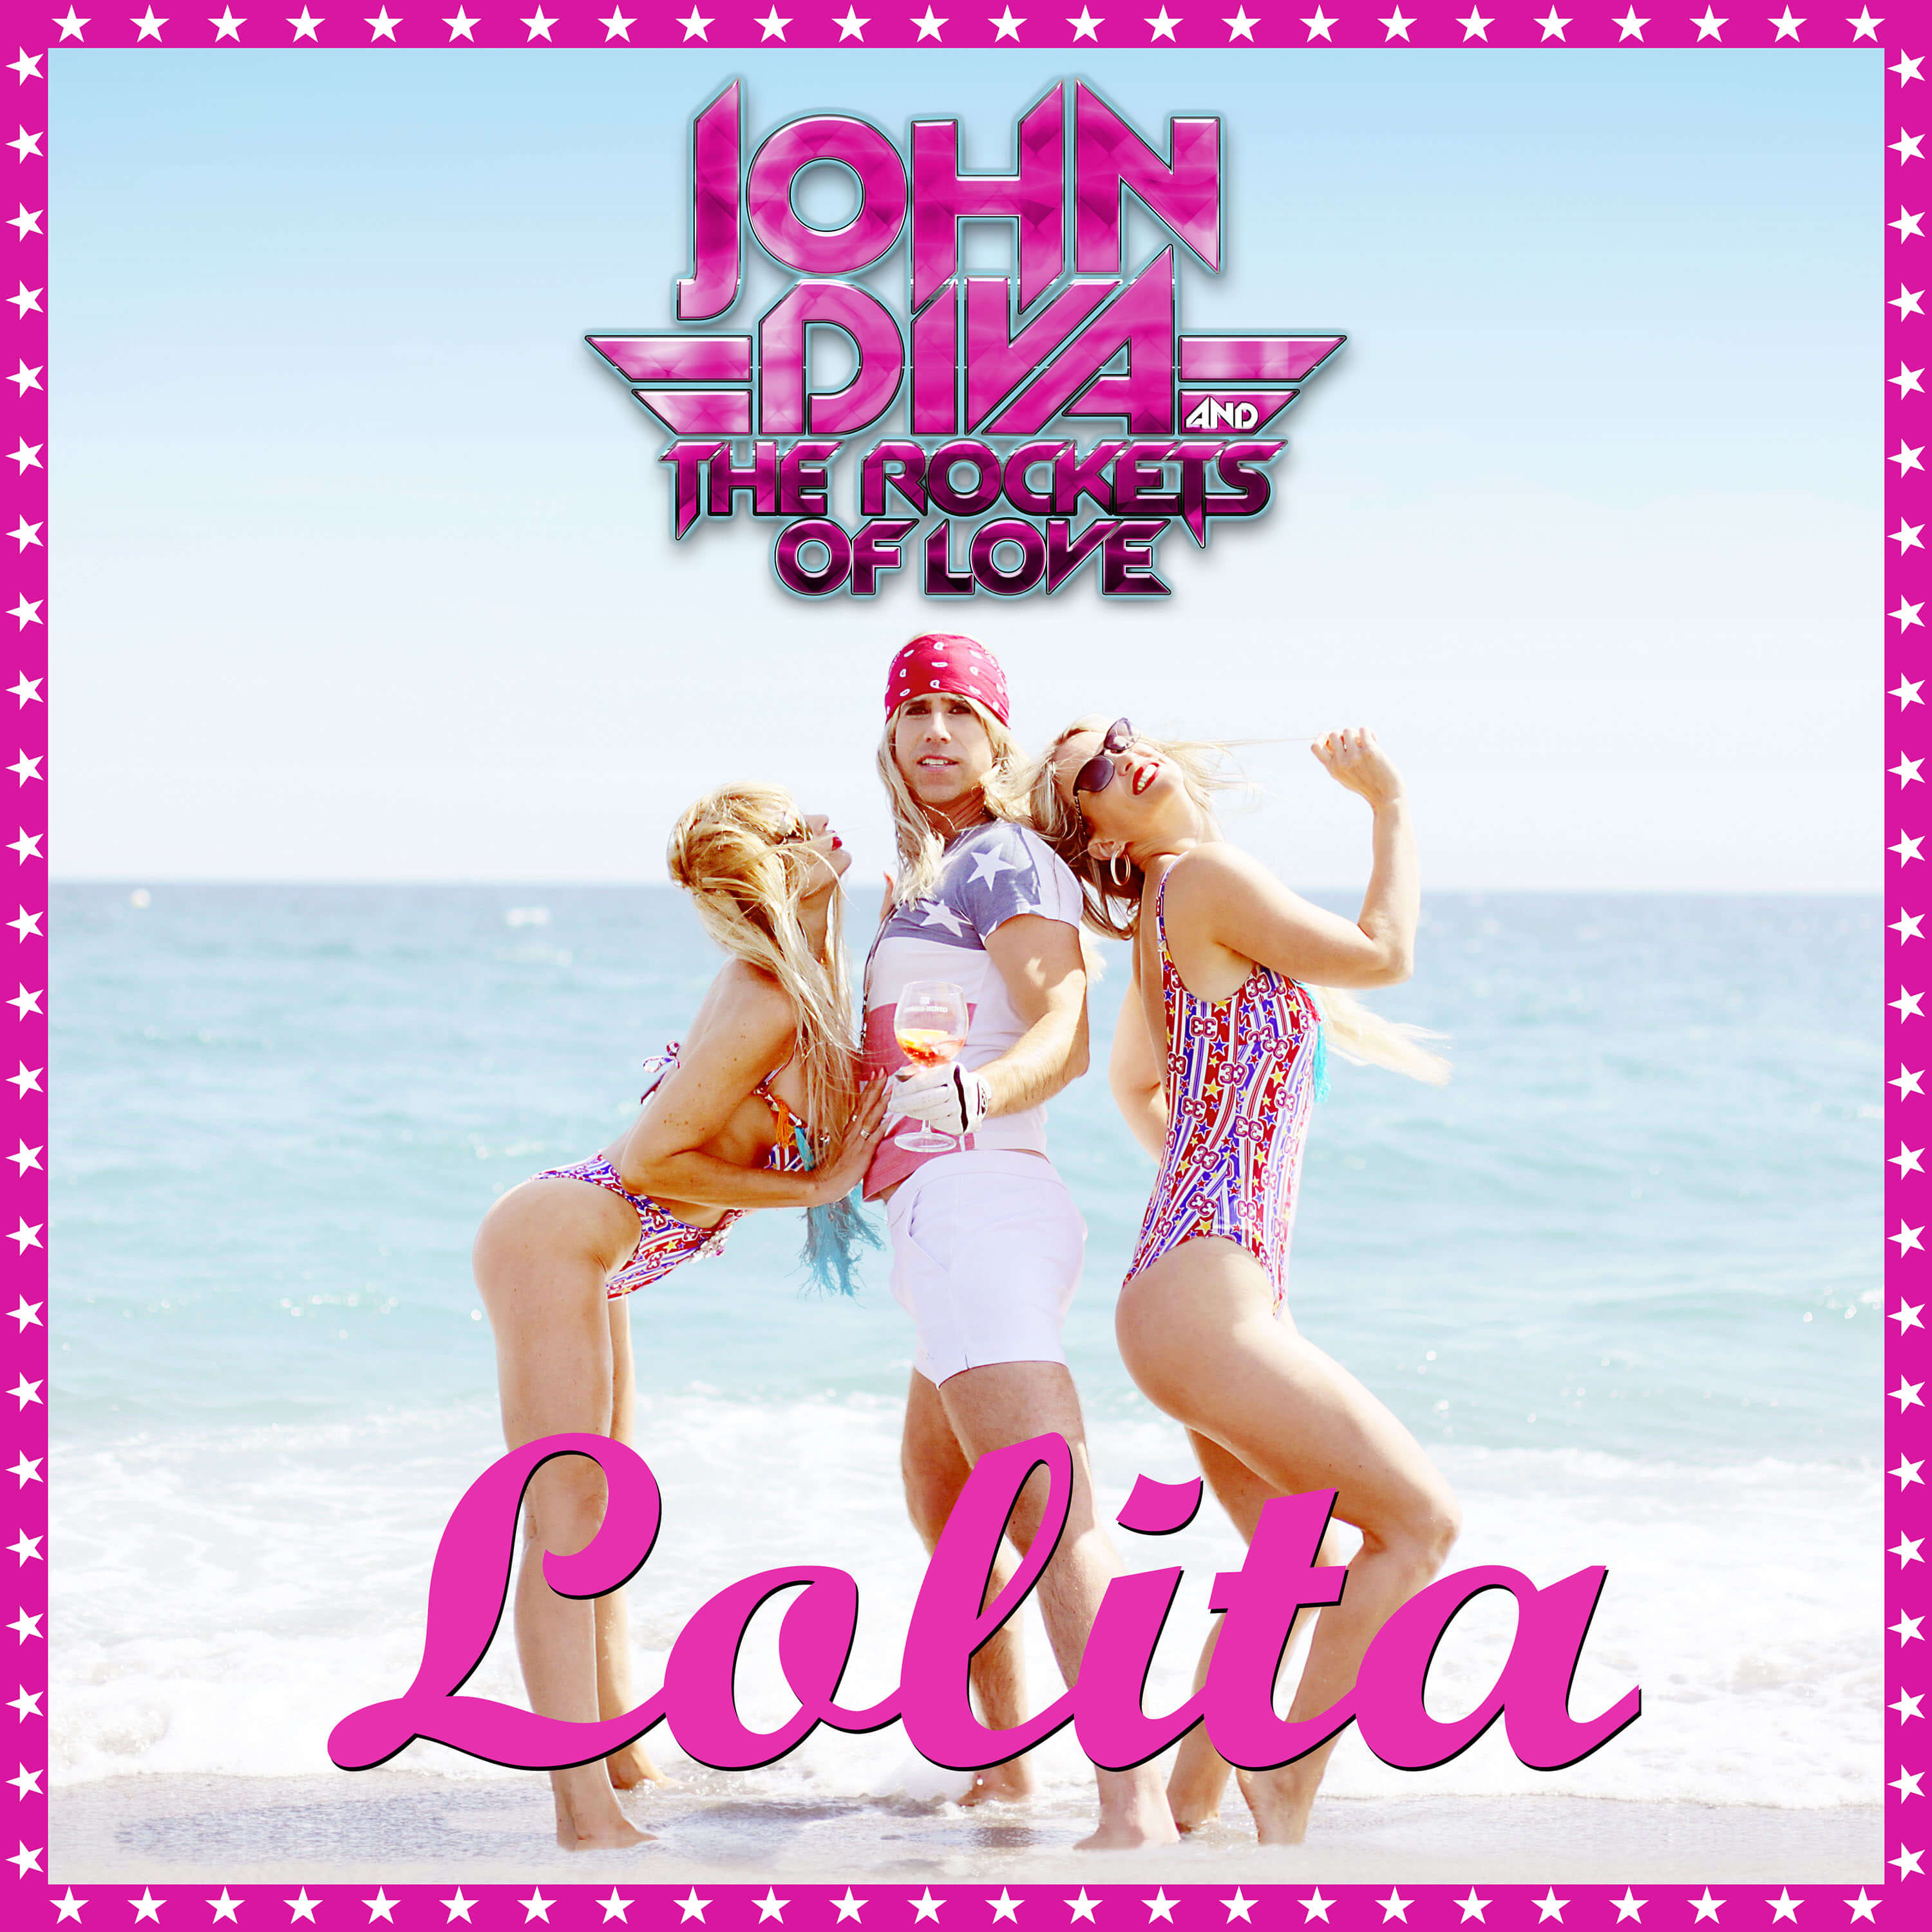 News: JOHN DIVA & The Rockets Of Love – 1. Single & Video „LOLITA“ Out Now